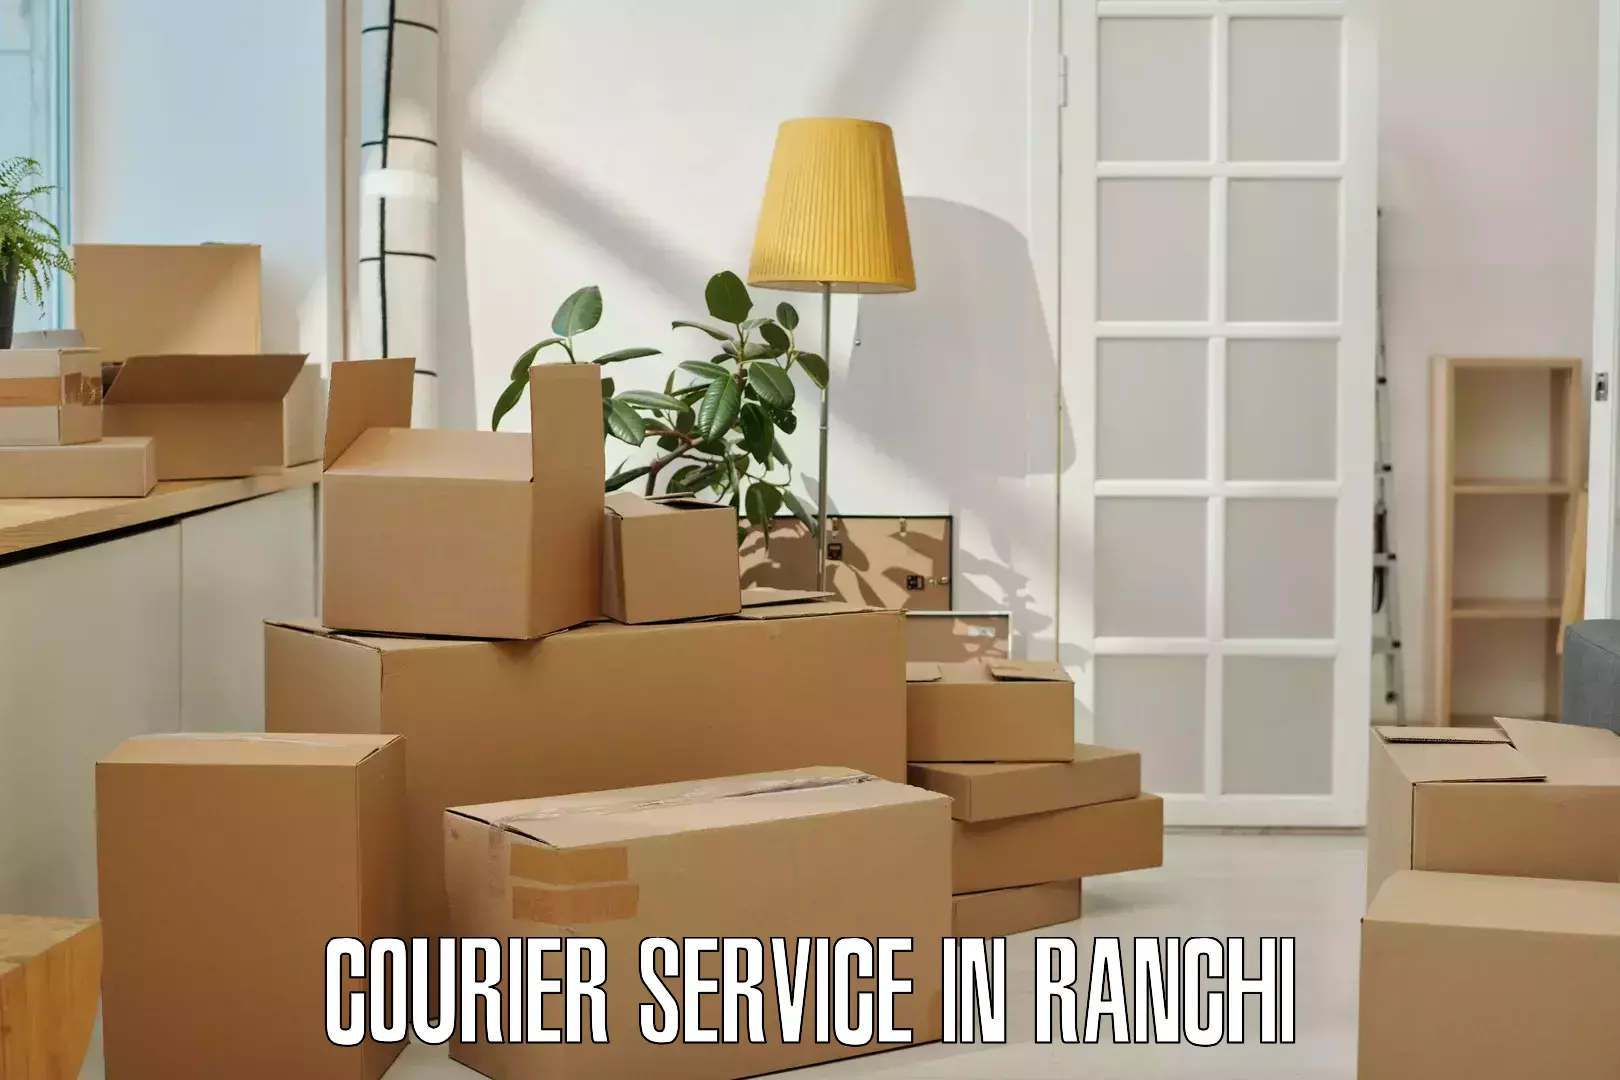 Rapid shipping services in Ranchi